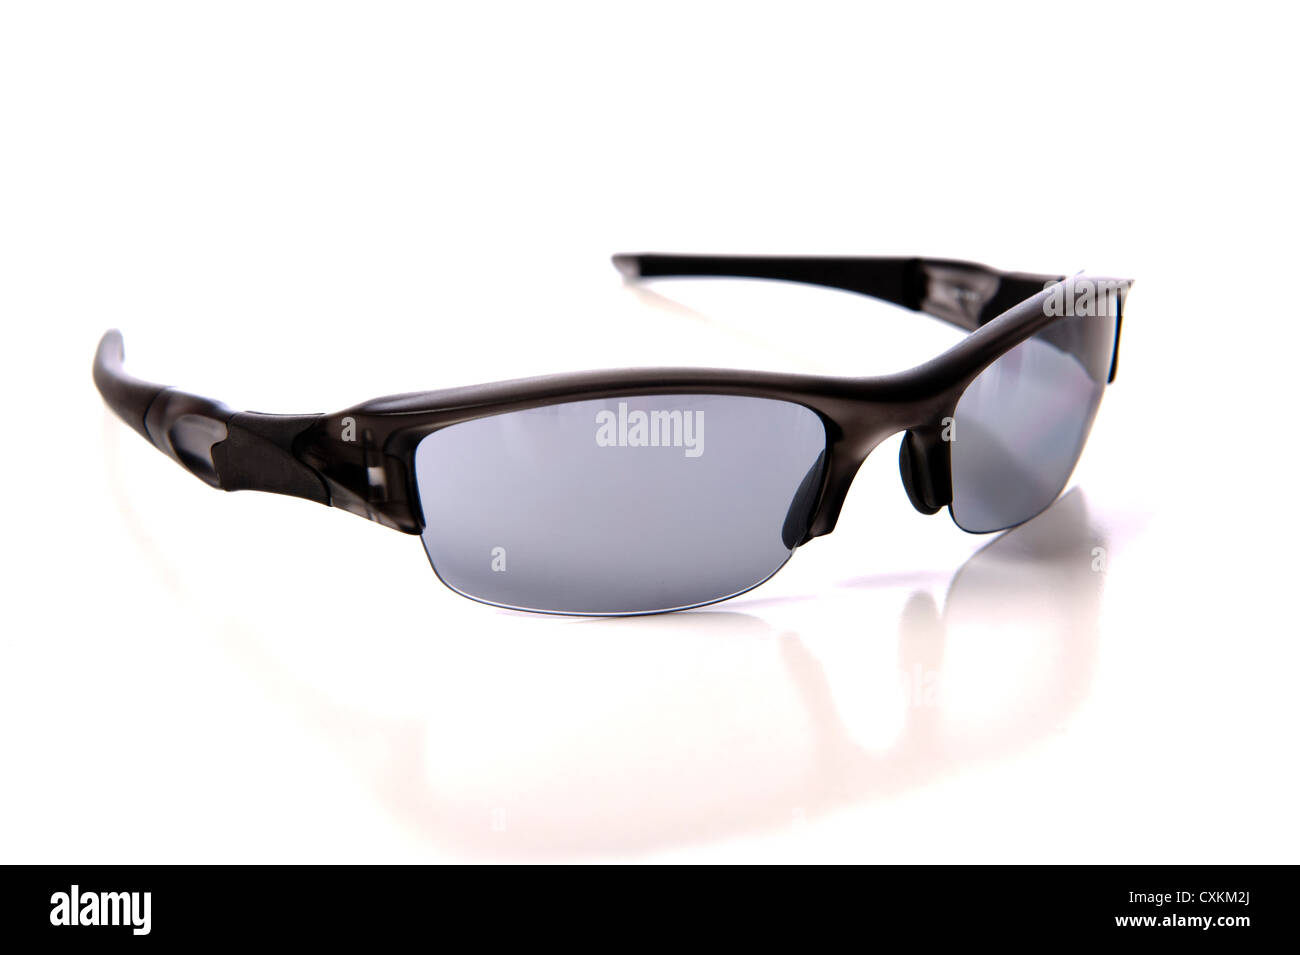 A pair of sports sunglasses or shades on a white background Stock Photo